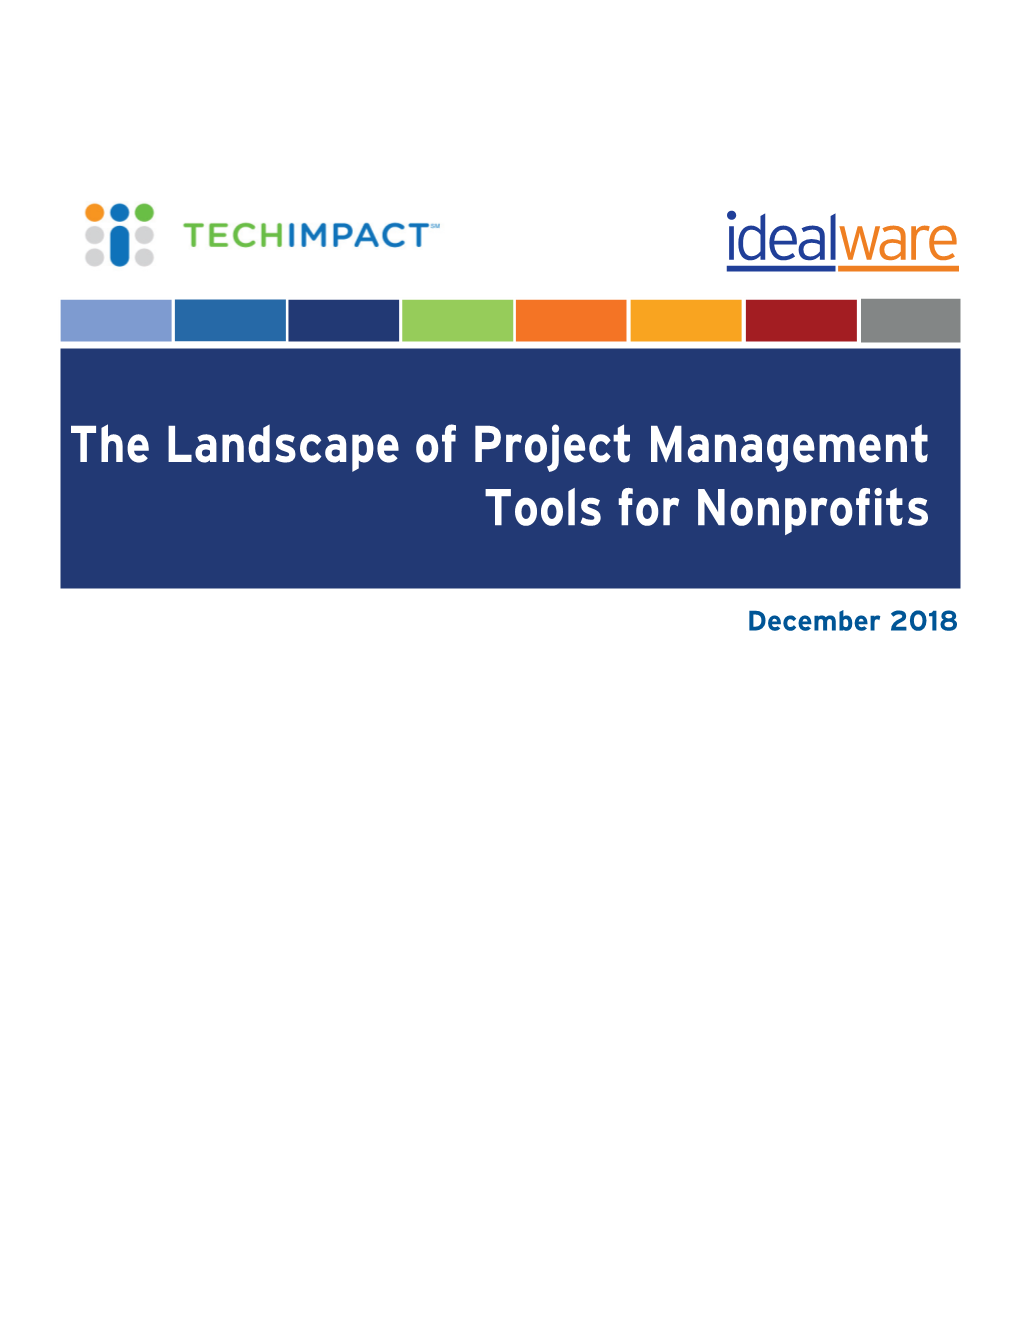 The Landscape of Project Management Tools for Nonprofits